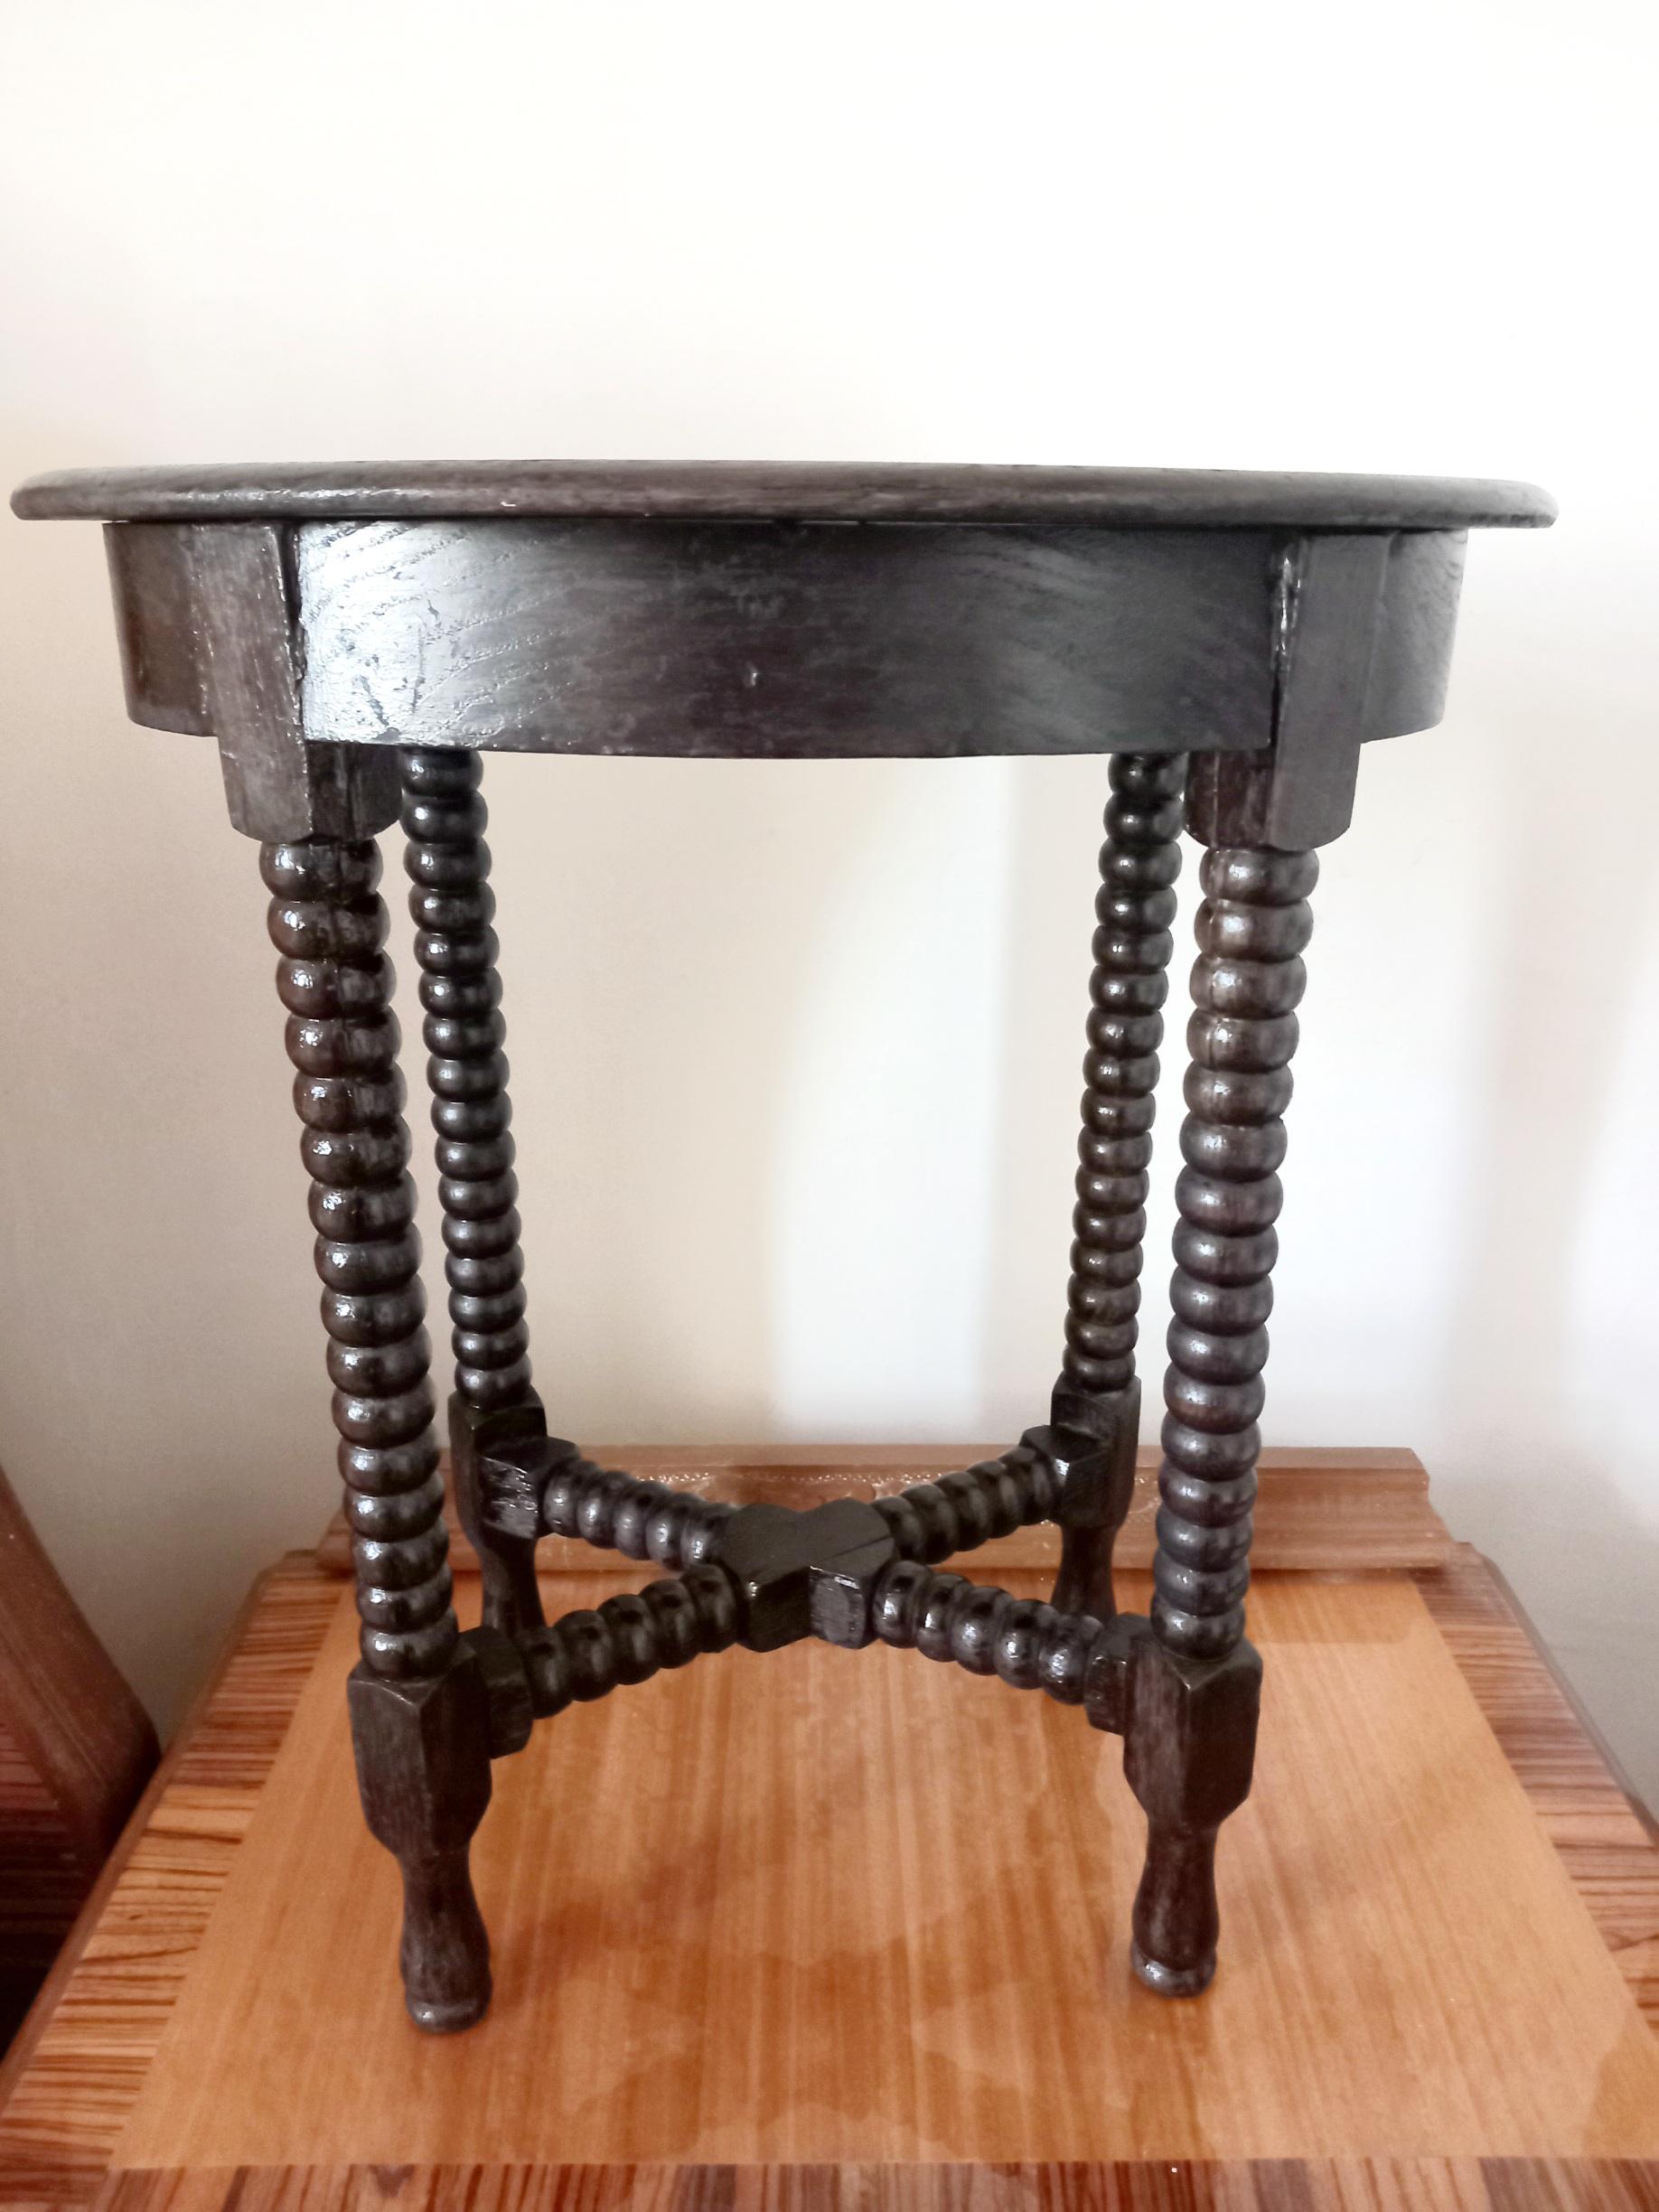 Small Oval Table or Stool Bobbin Turned Legs, 19th Century Spain 9